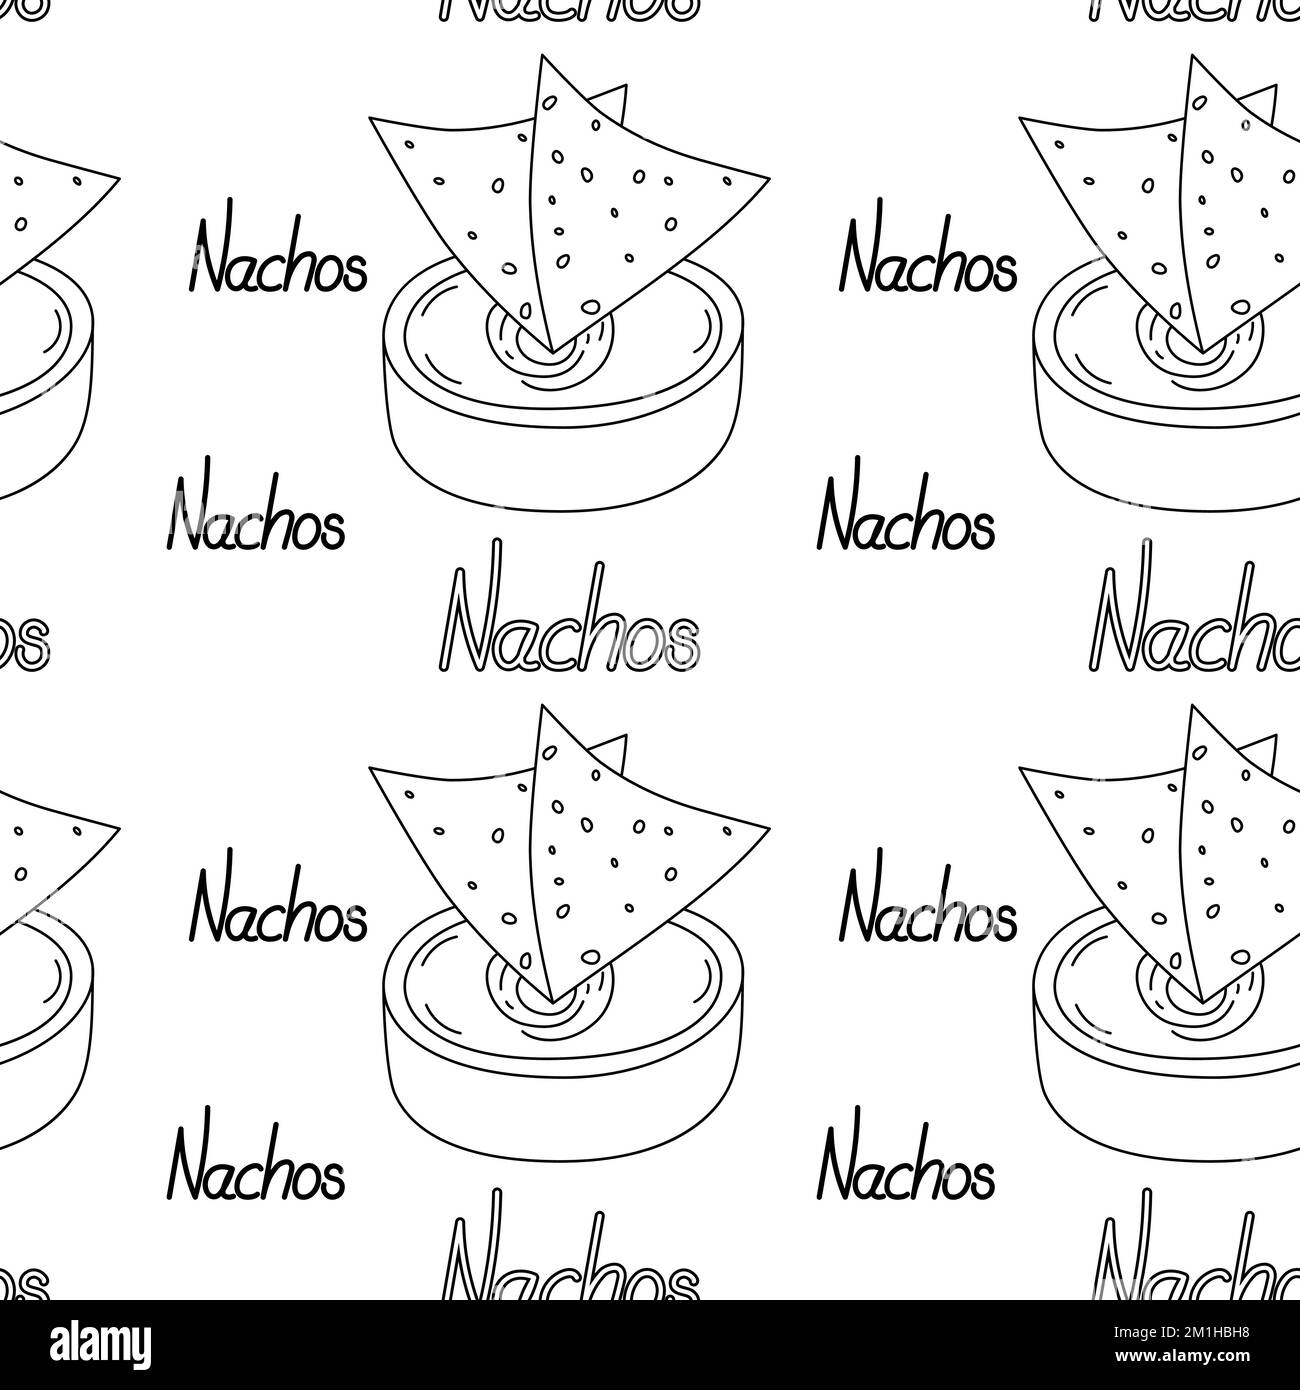 Endless pattern with traditional corn Mexican chips Nachos and sauce in bowl with lettering Nachos by hand. Latin American catering. Backdrop texture. Isolate. Good for wrapping, wallpaper, cards. EPS Stock Vector